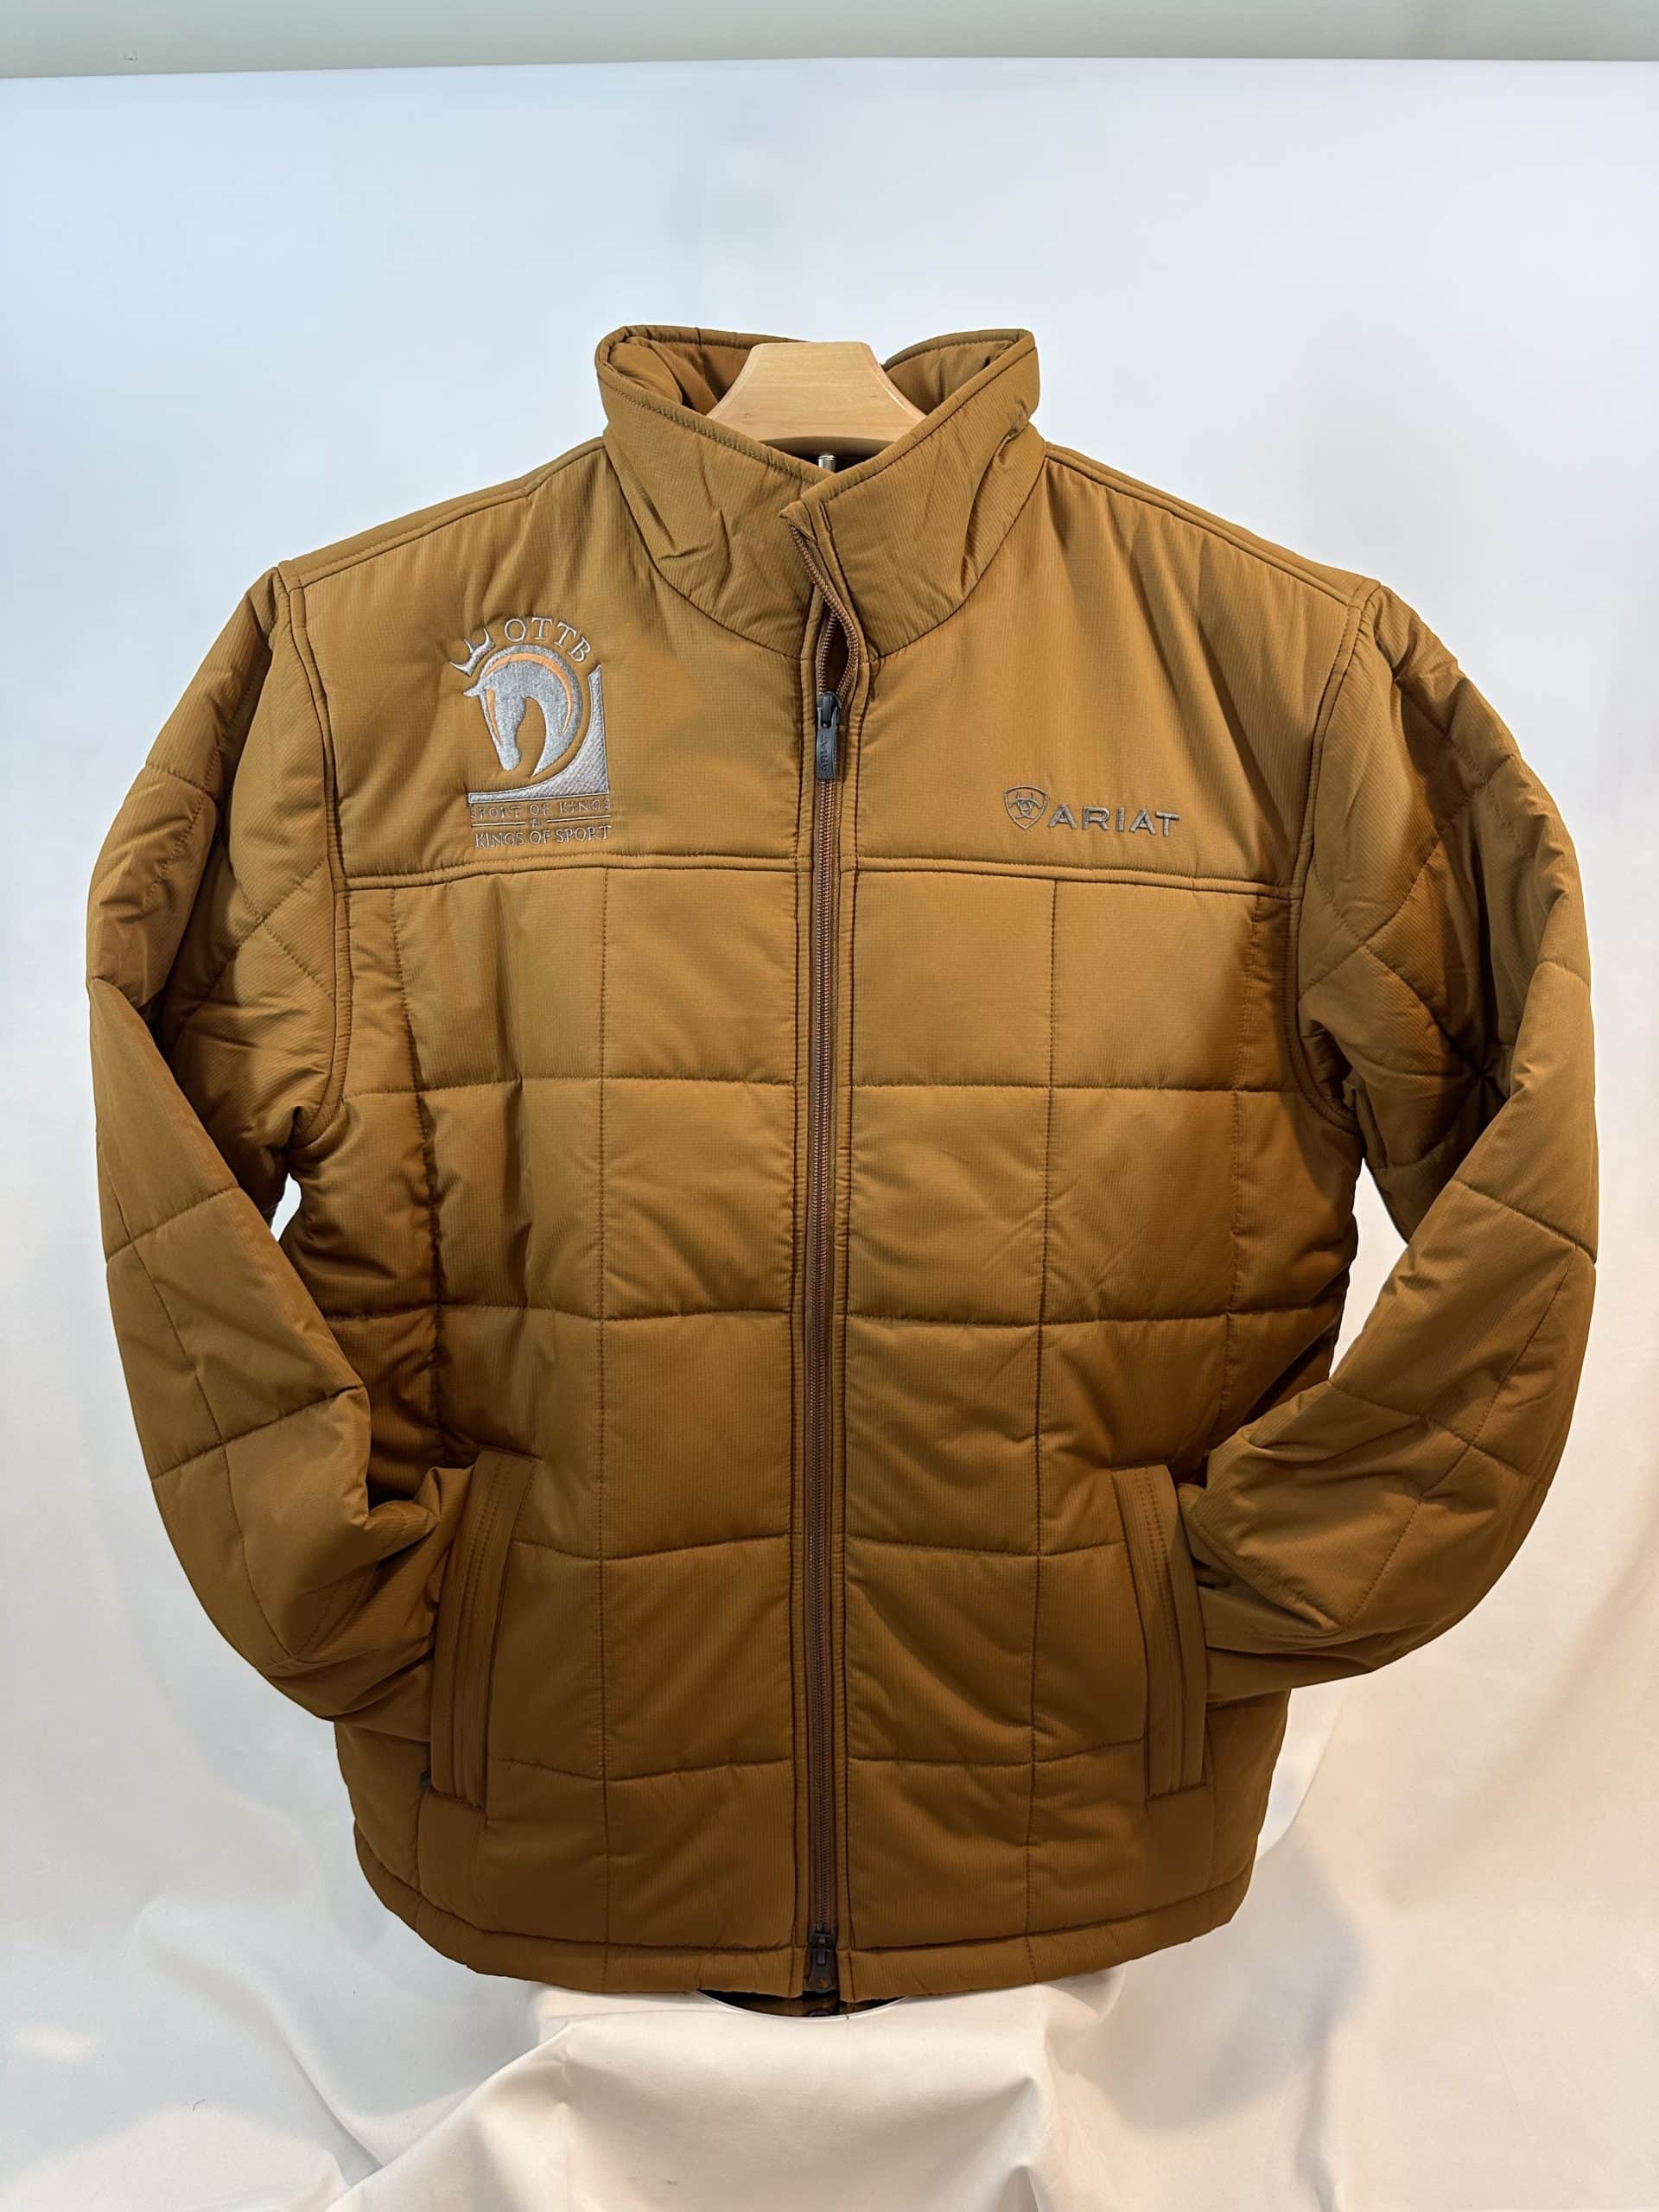 Featured image for “Men's Ariat Crius Insulated Jacket”